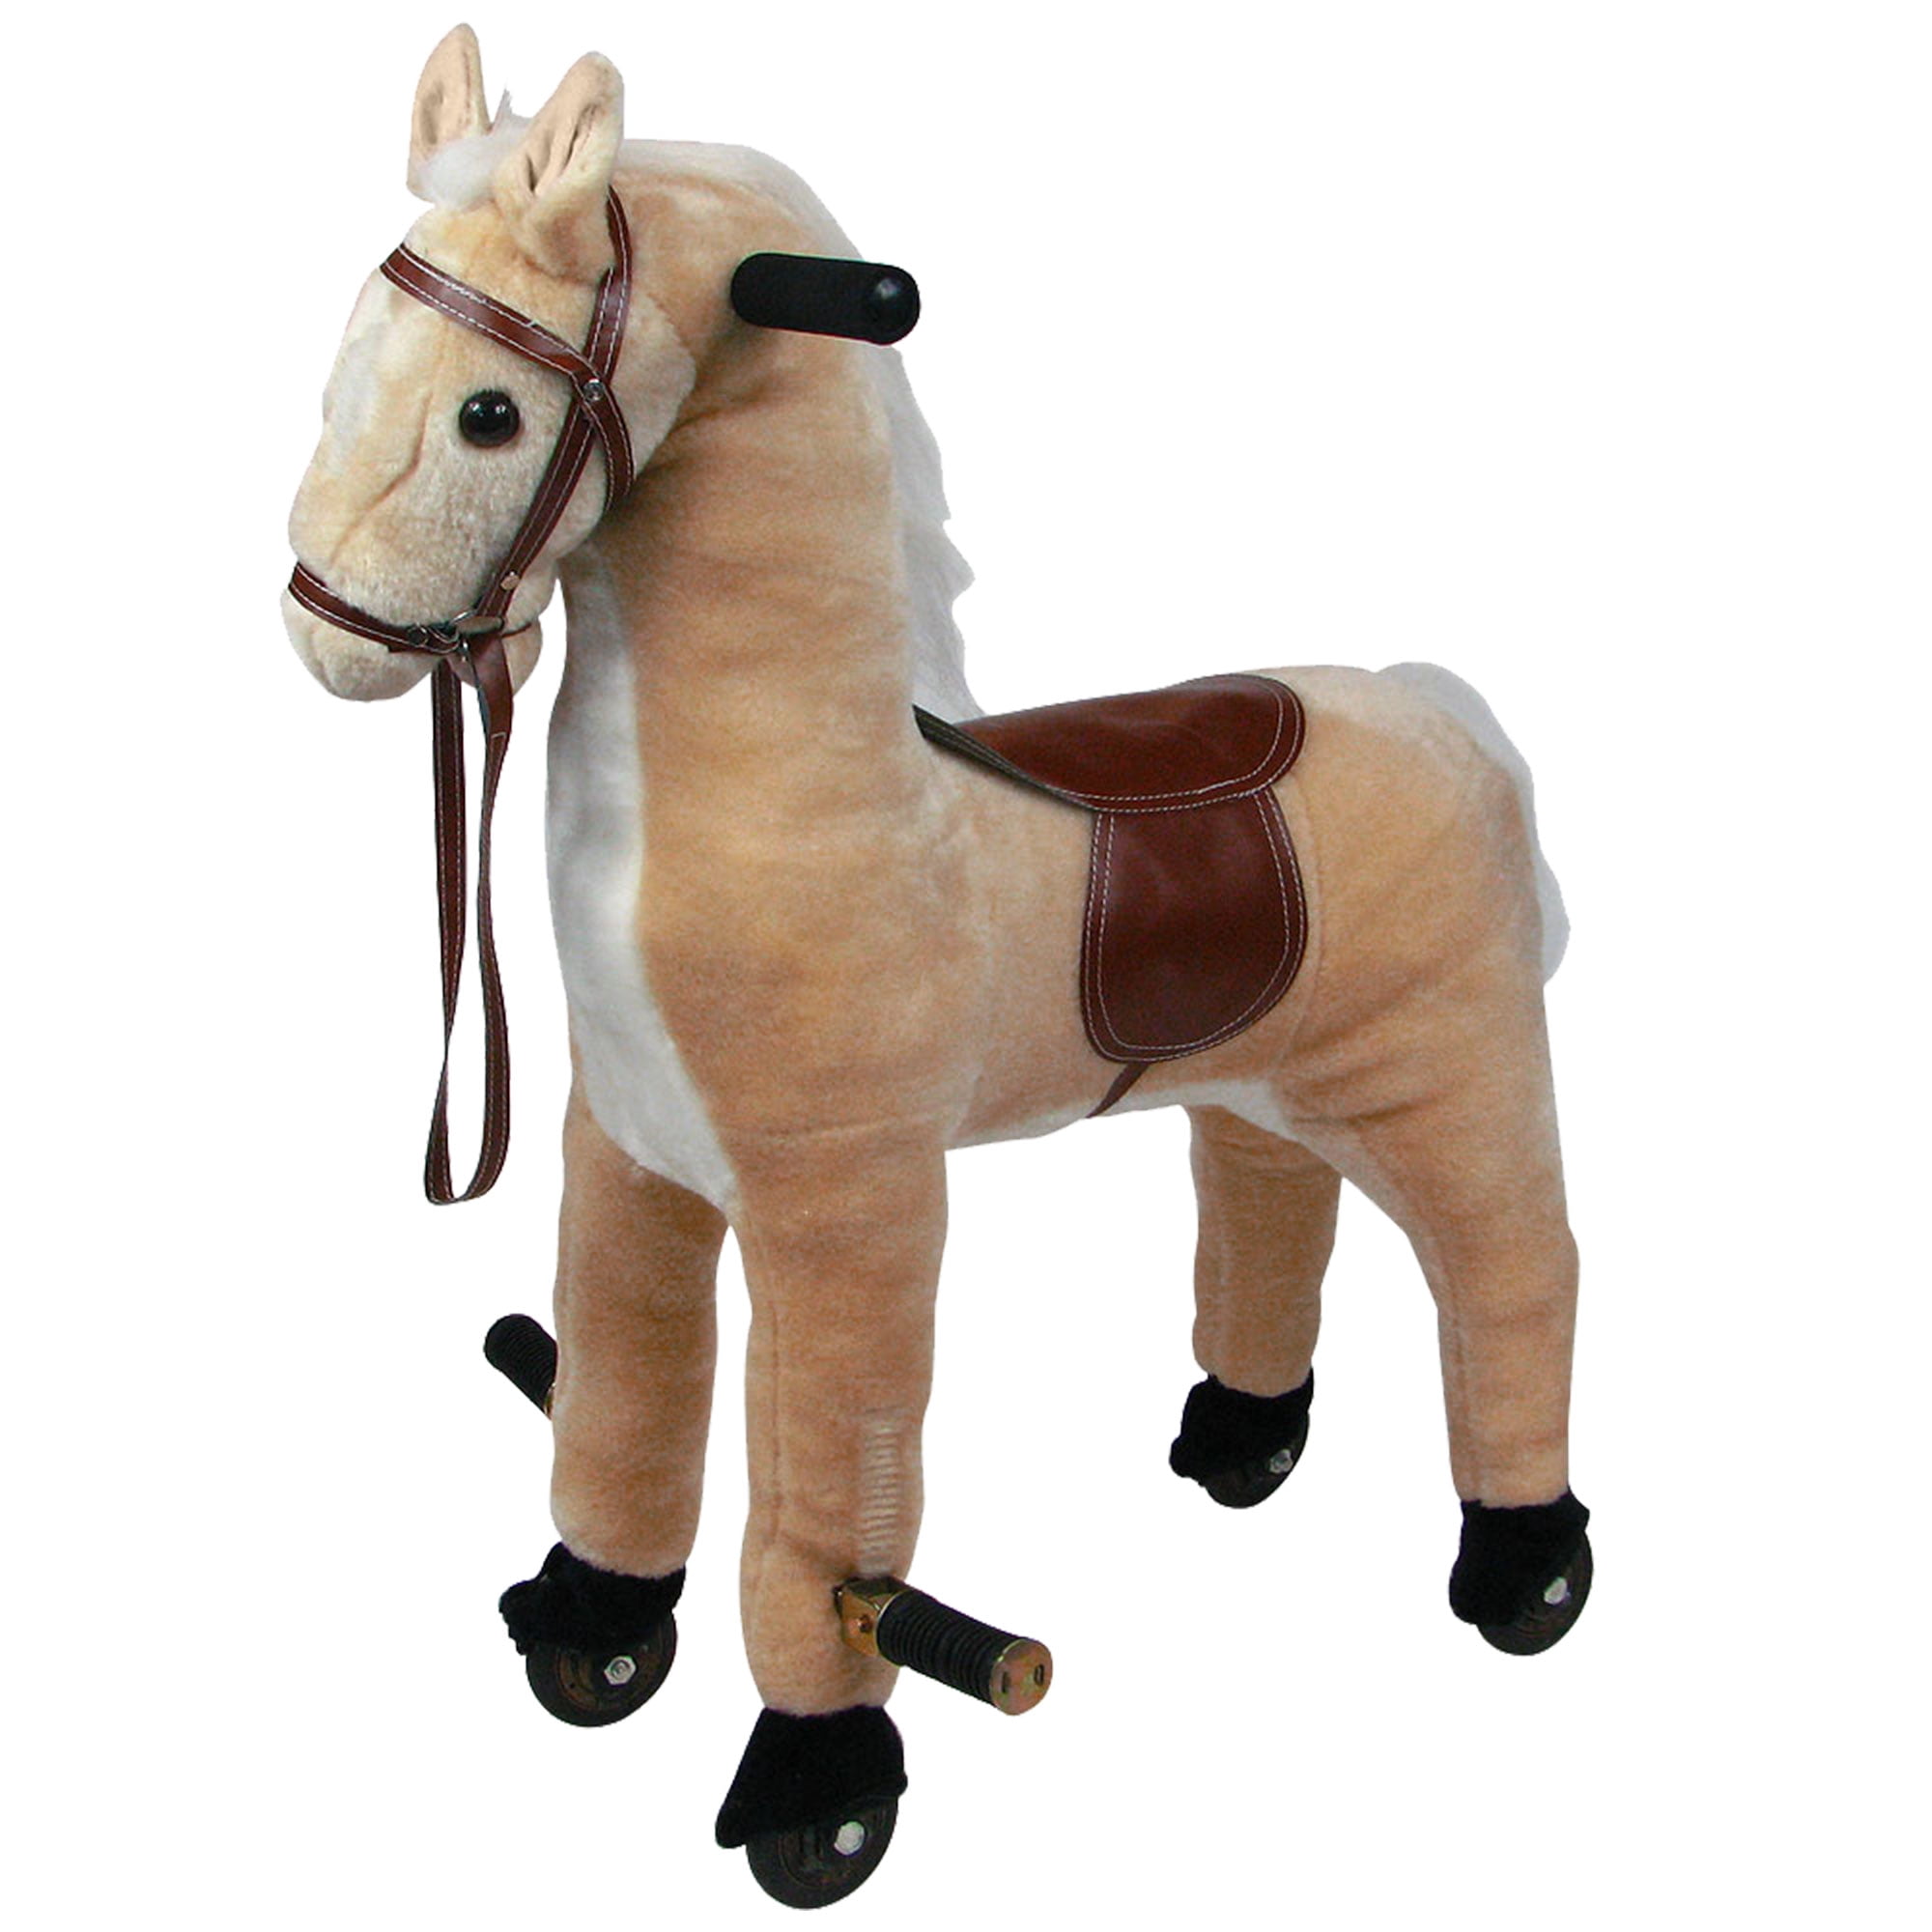 age 2-5 Boys & Girls -BRAND NEW -USA 01B SMALL Giddy Up Ride-ON Horse 'BLK/WHT 